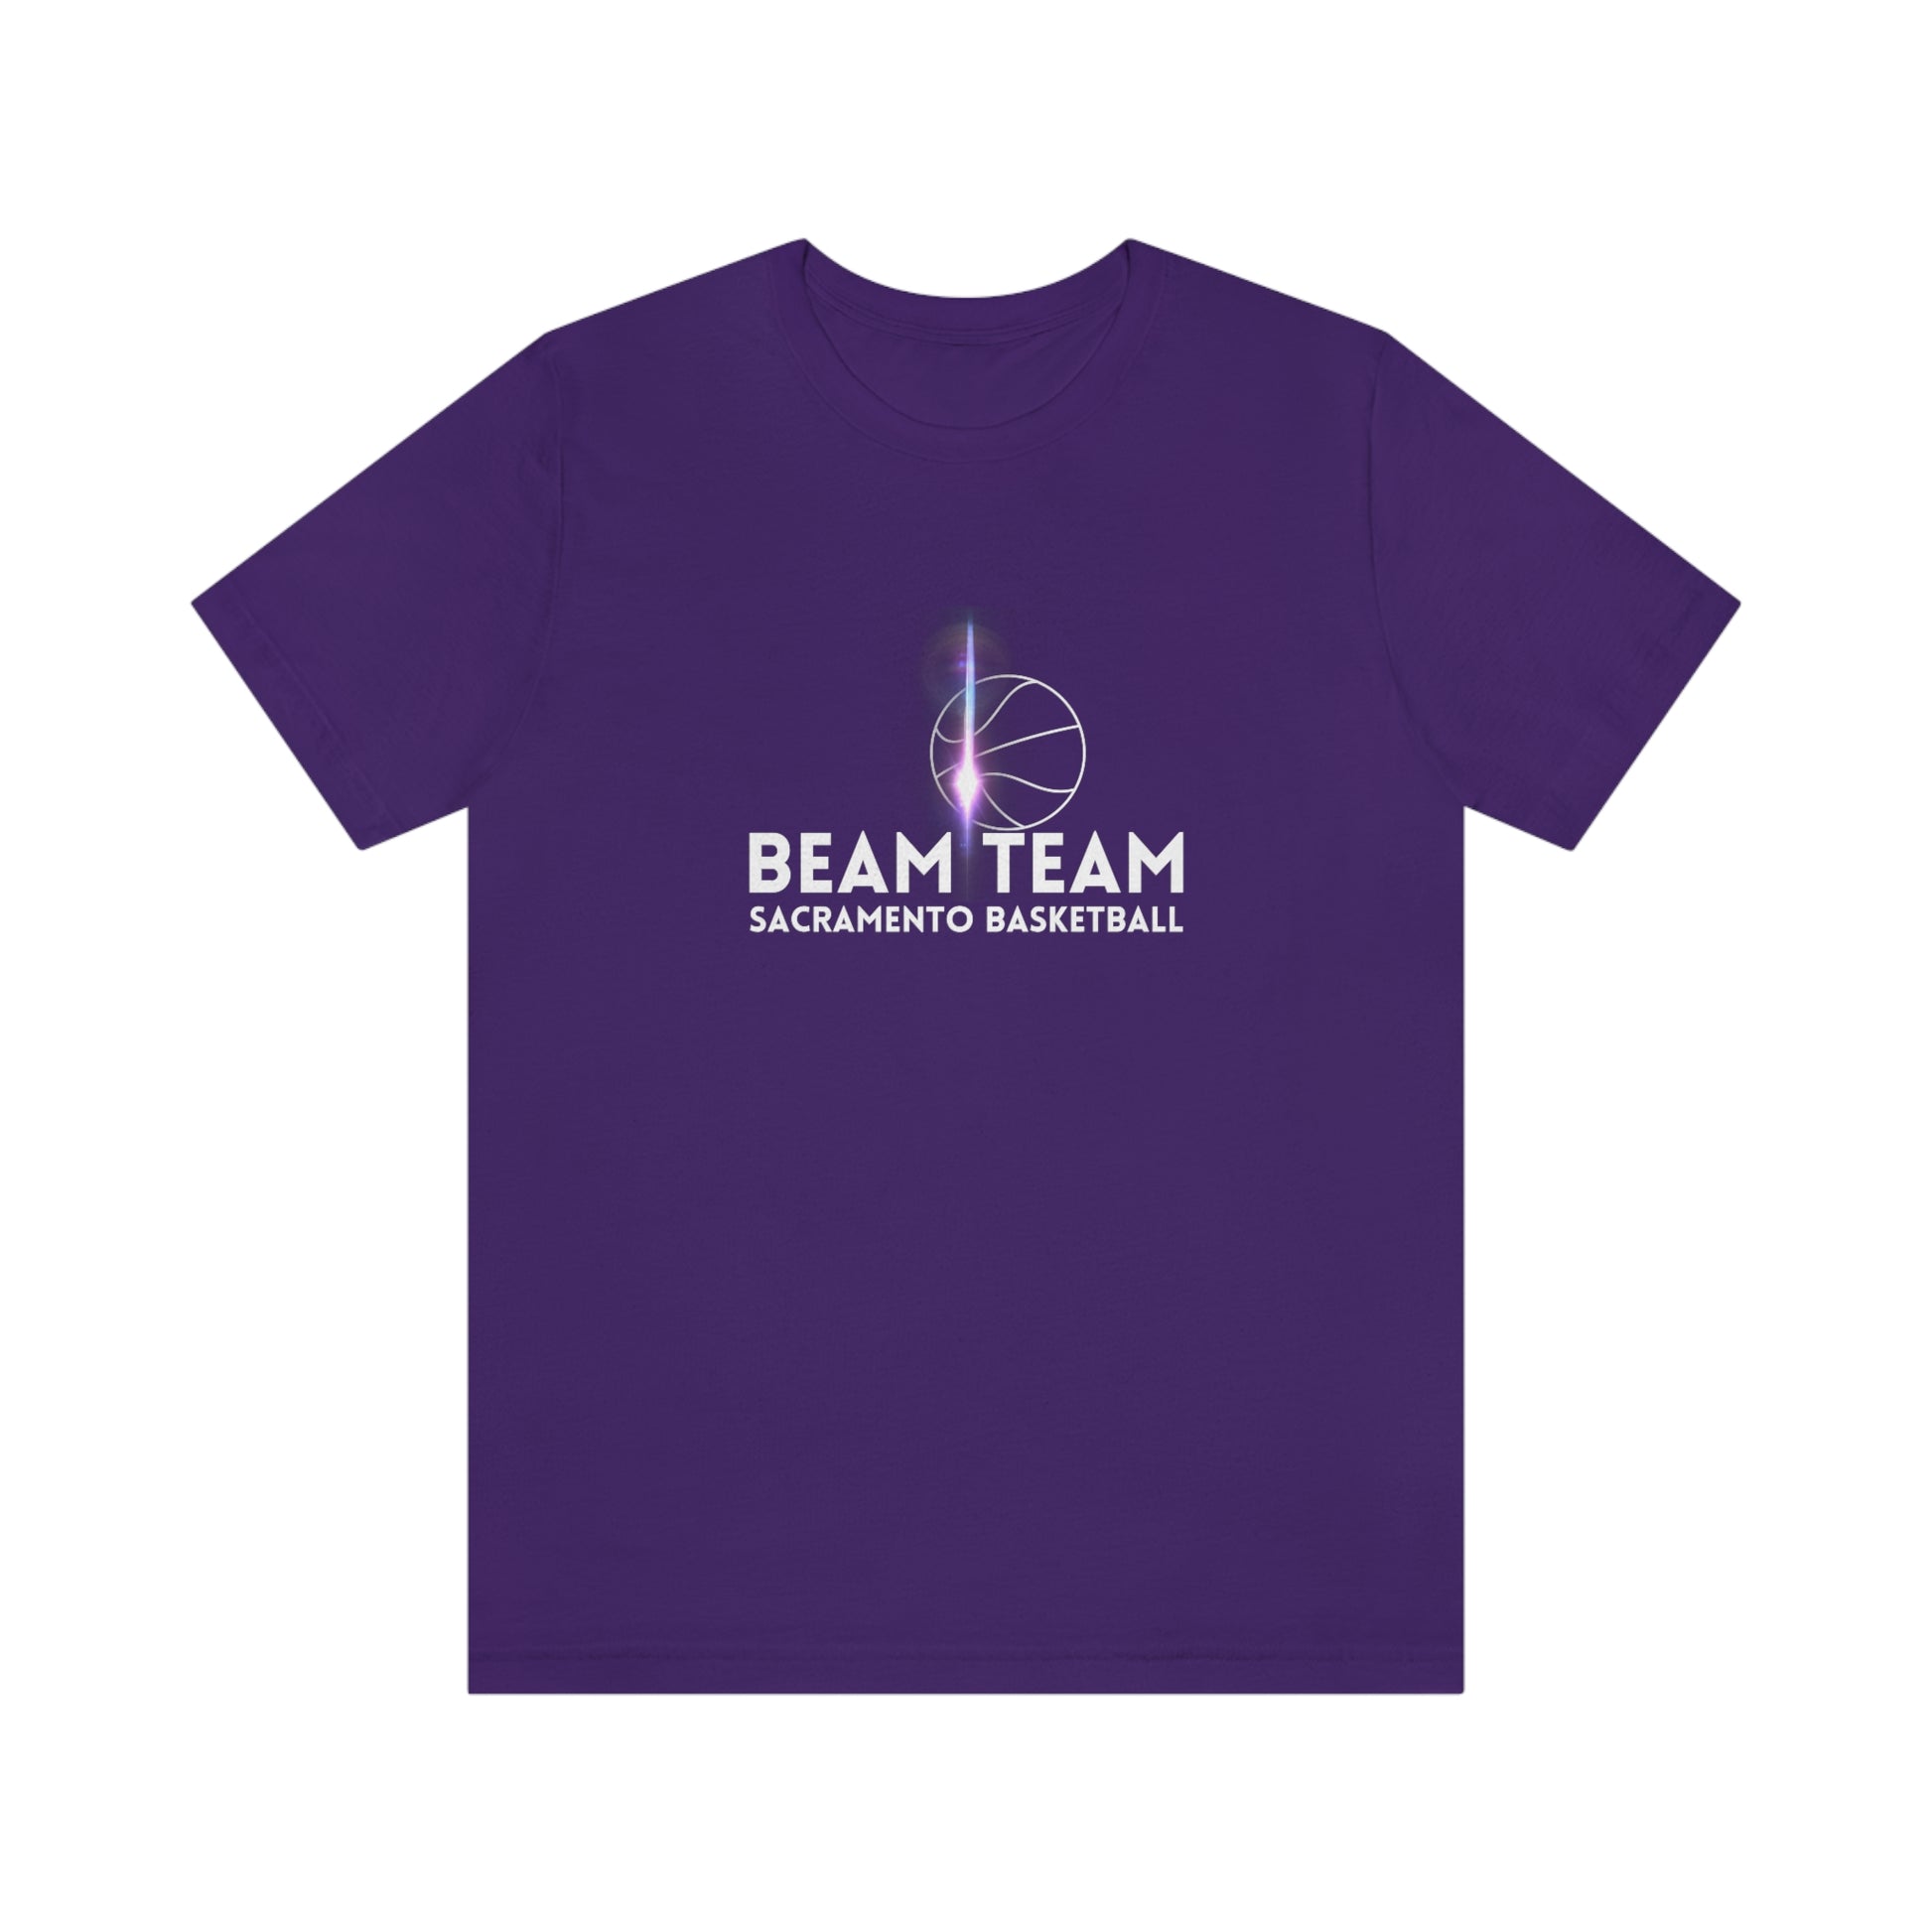 Beam Team Kings Basketball Unisex T-Shirt, Beam Team, Light the Beam! Celebrate another W - win - for your Kings Basketball team in this comfortable, cool t-shirt.